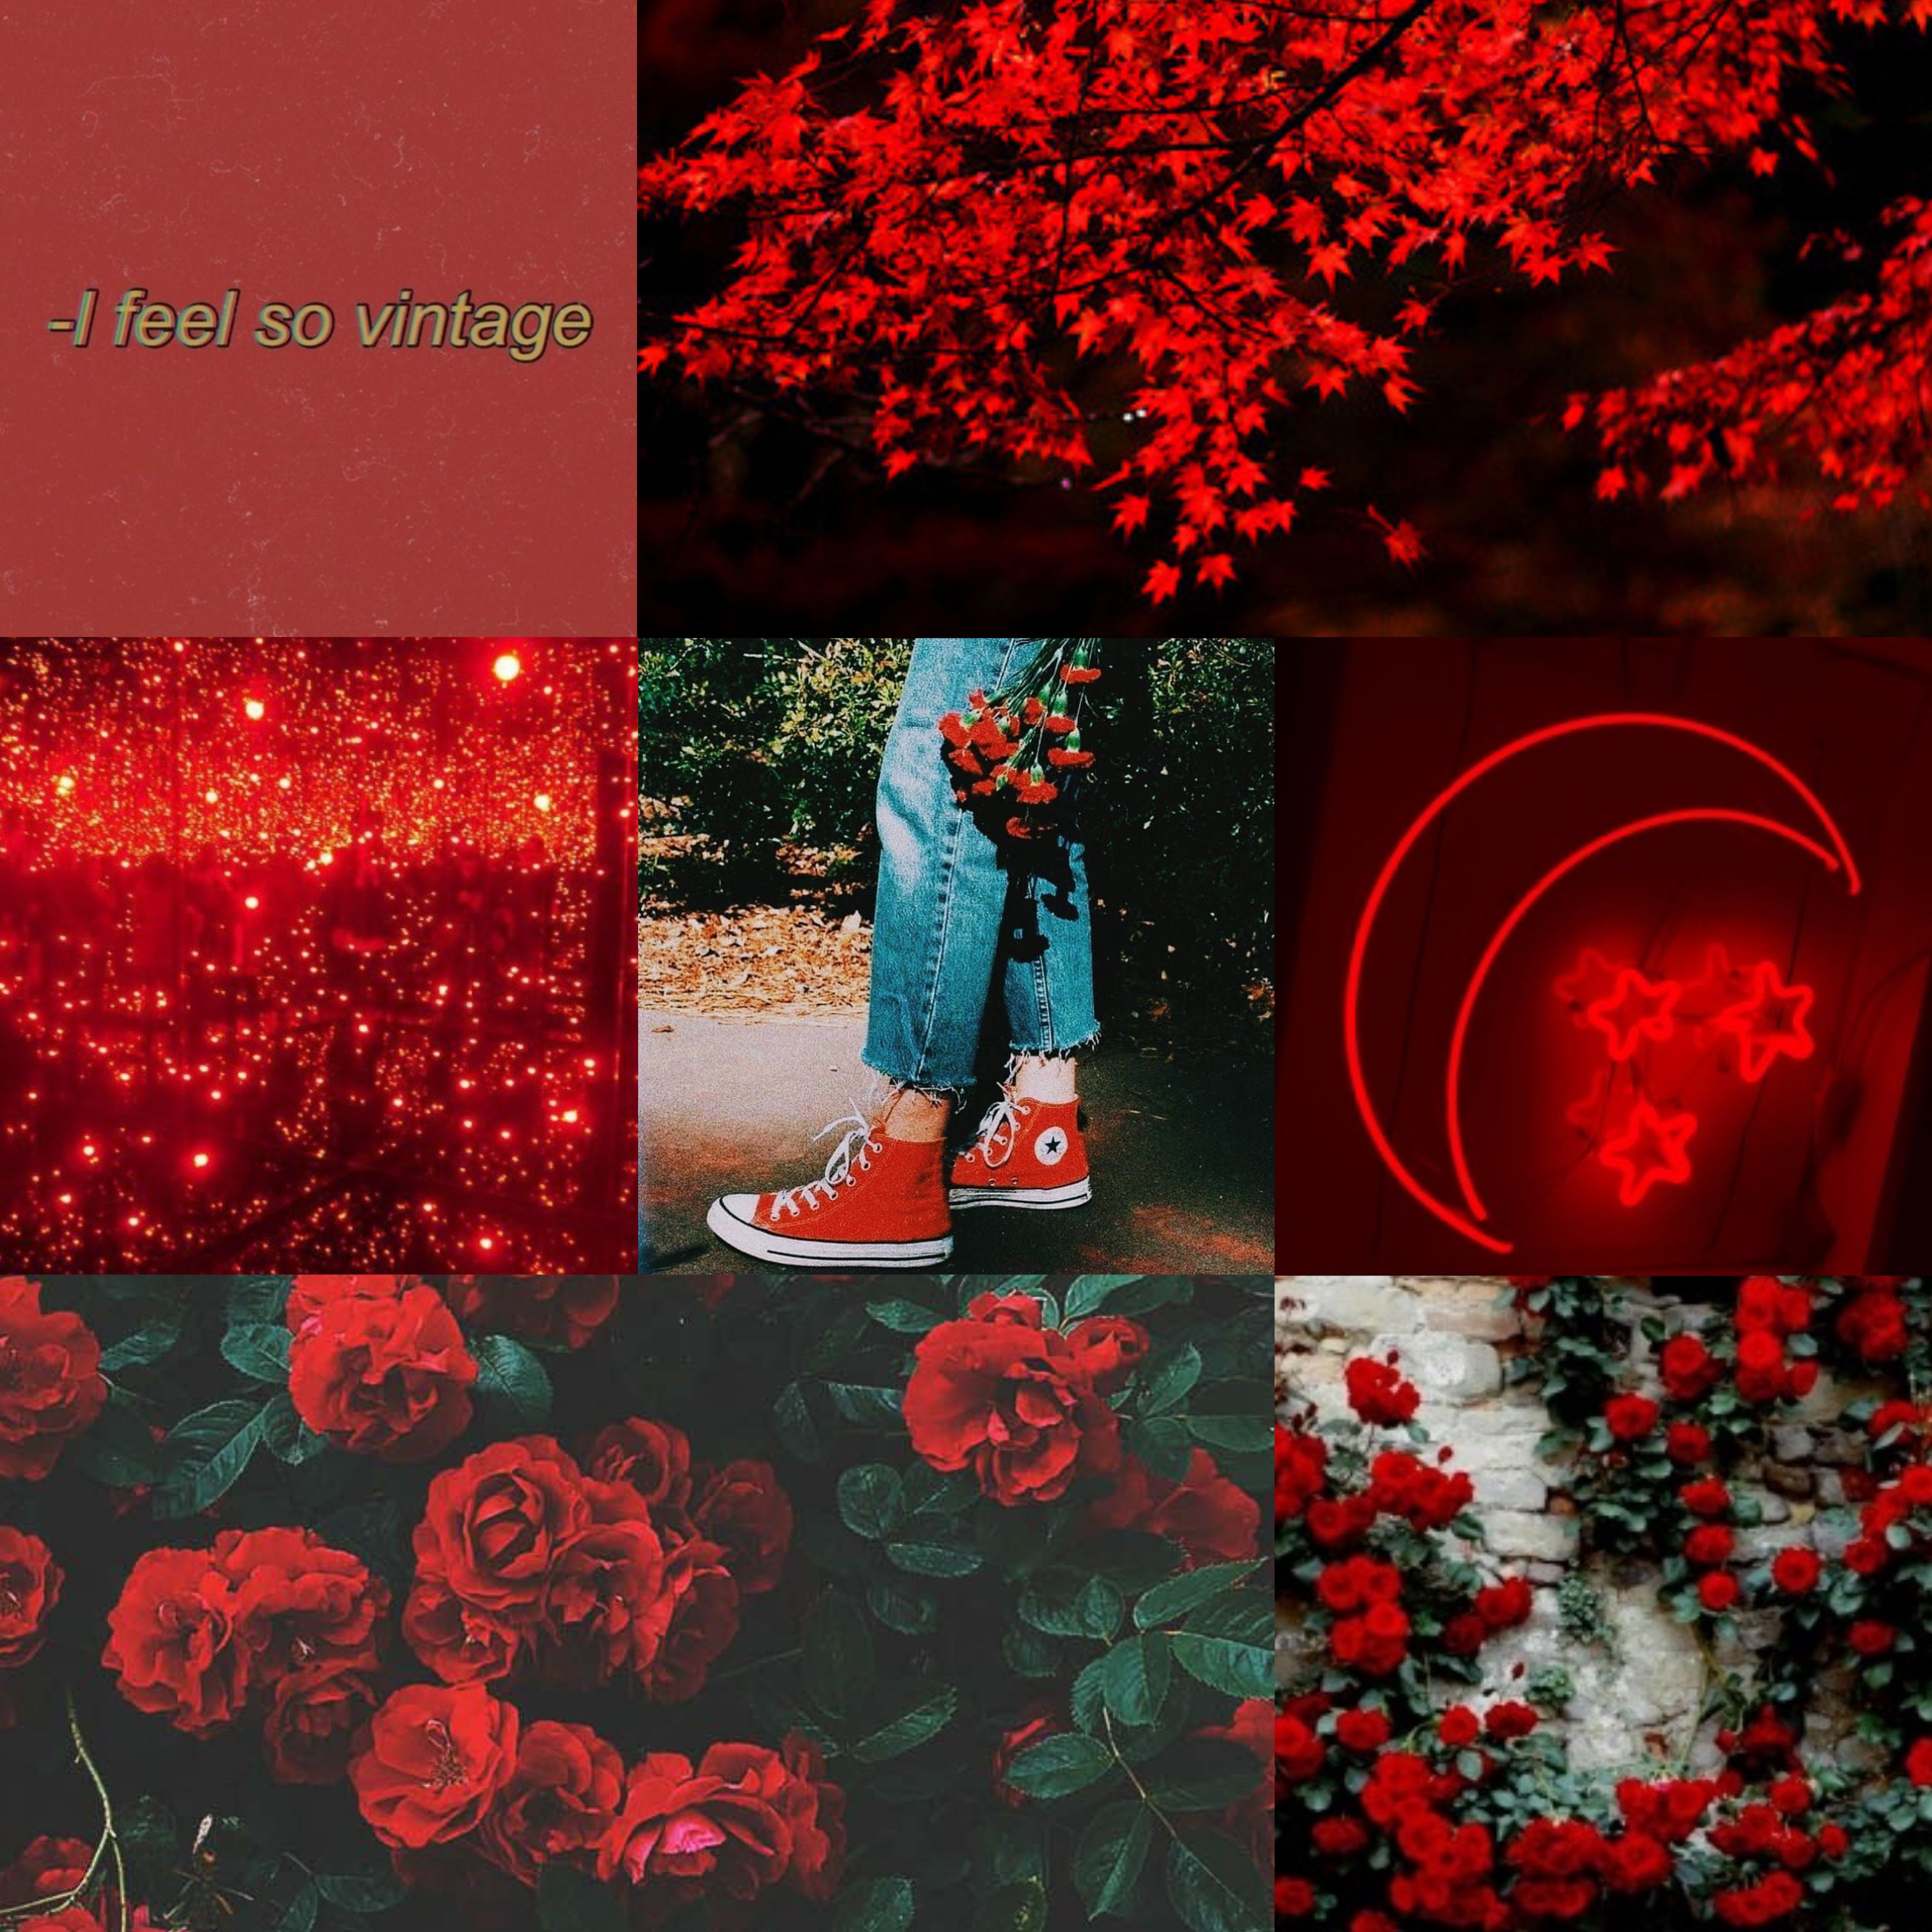 freetoedit vintage red Image by s t i t c h